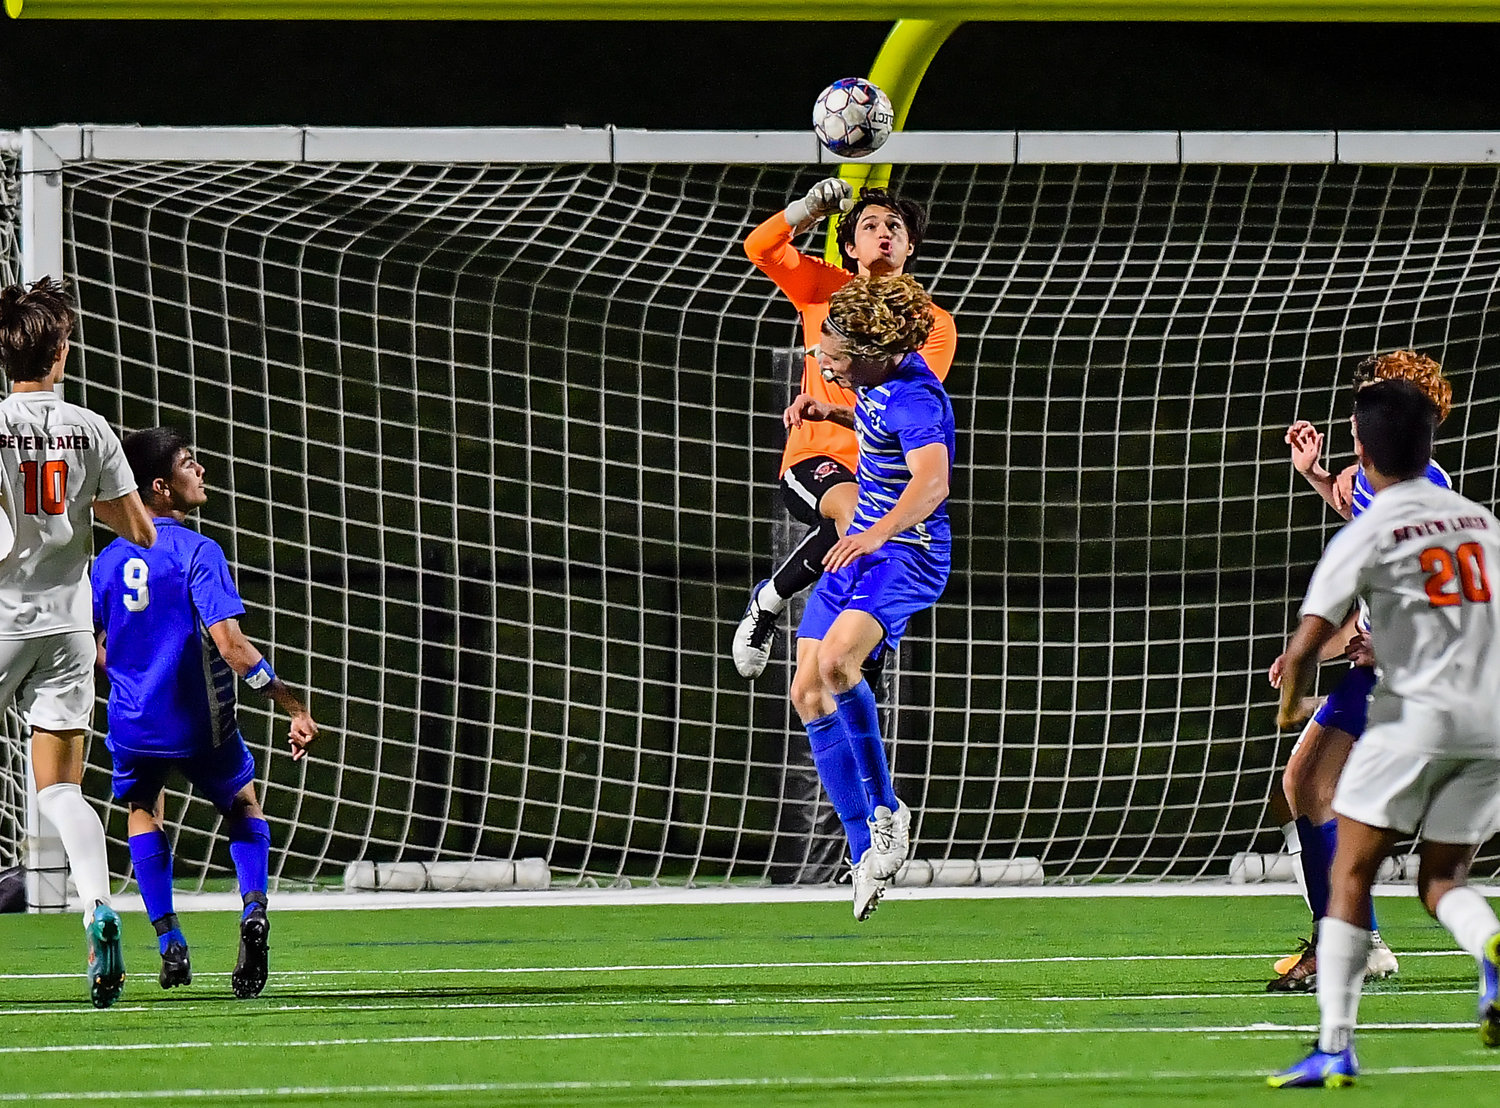 April 1, 2022: Seven Lakes goal keeper Anthony Gonzalez #1 makes the save during Regional Quarterfinal soccer playoff, Seven Lakes vs Katy Taylor at Rhode Stadium. (Photo by Mark Goodman / Katy Times)